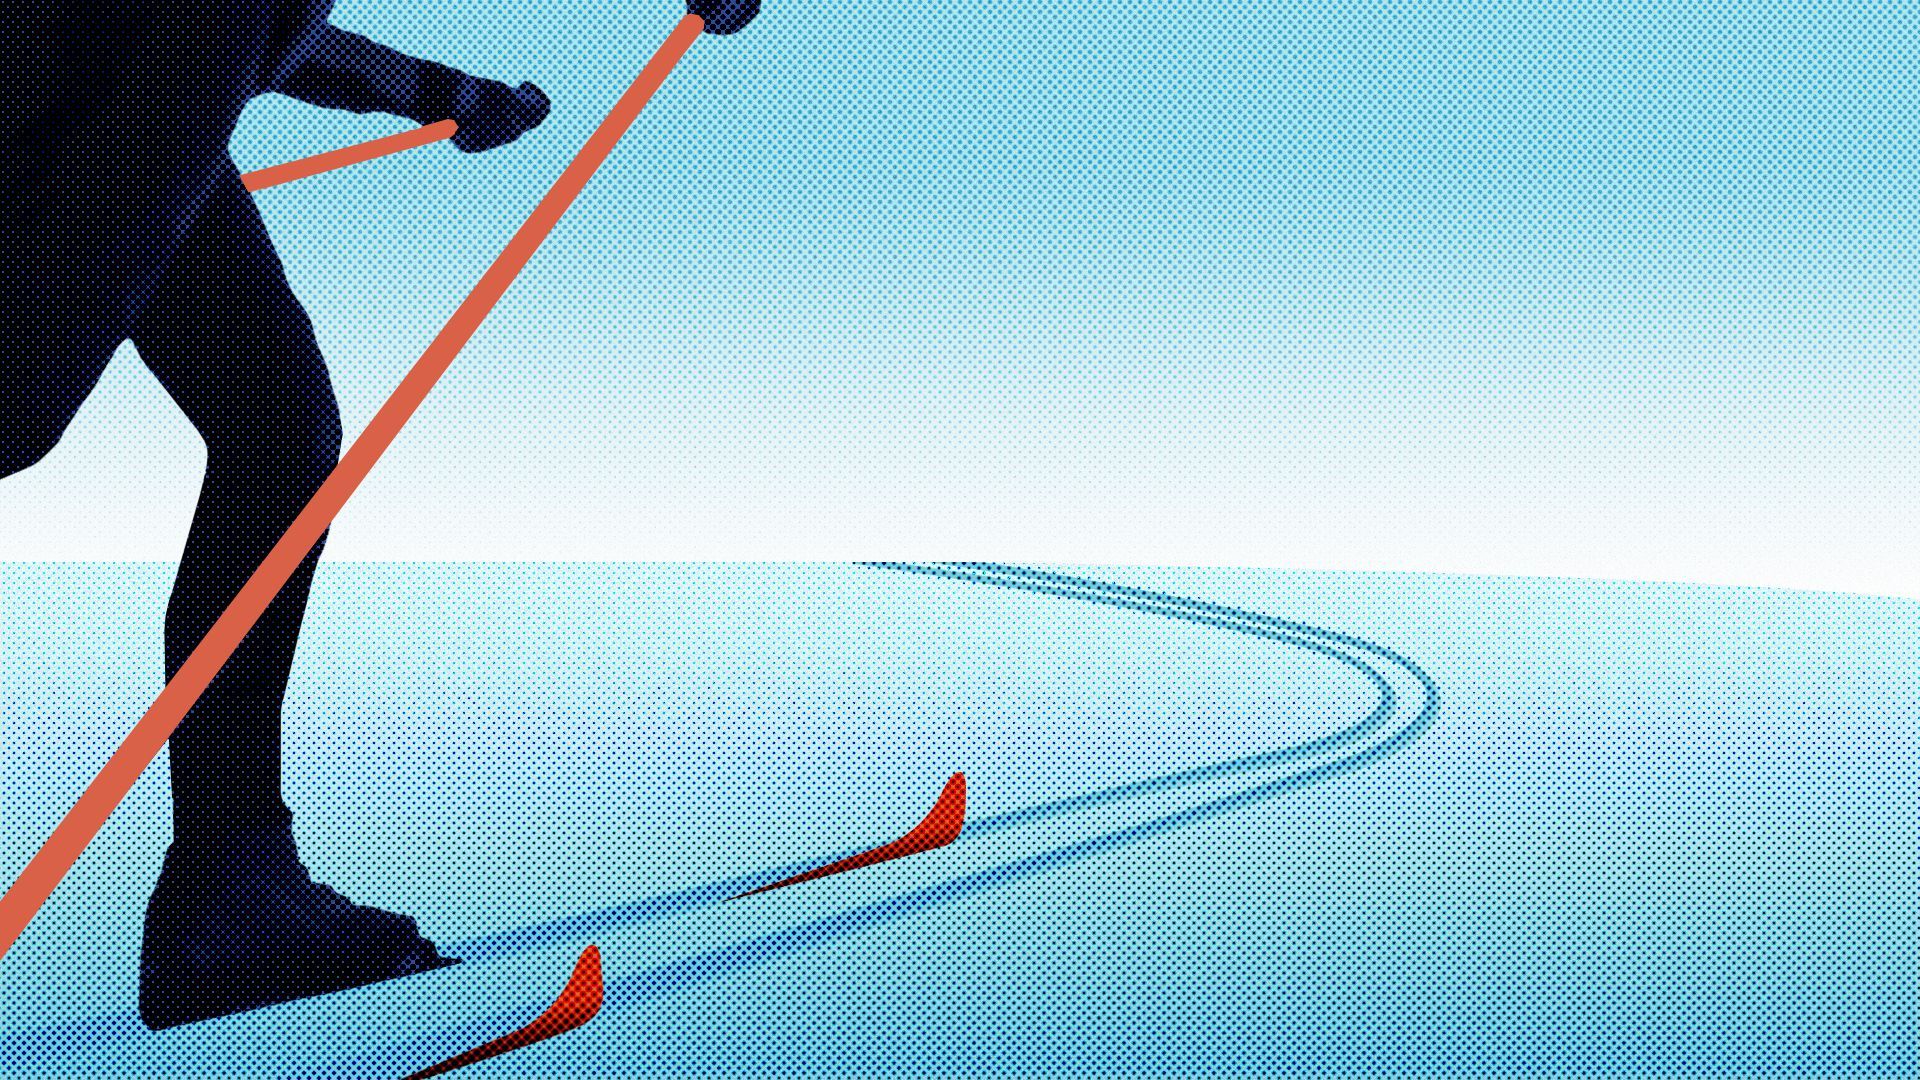 Illustration of a cross country skier in snowy tracks